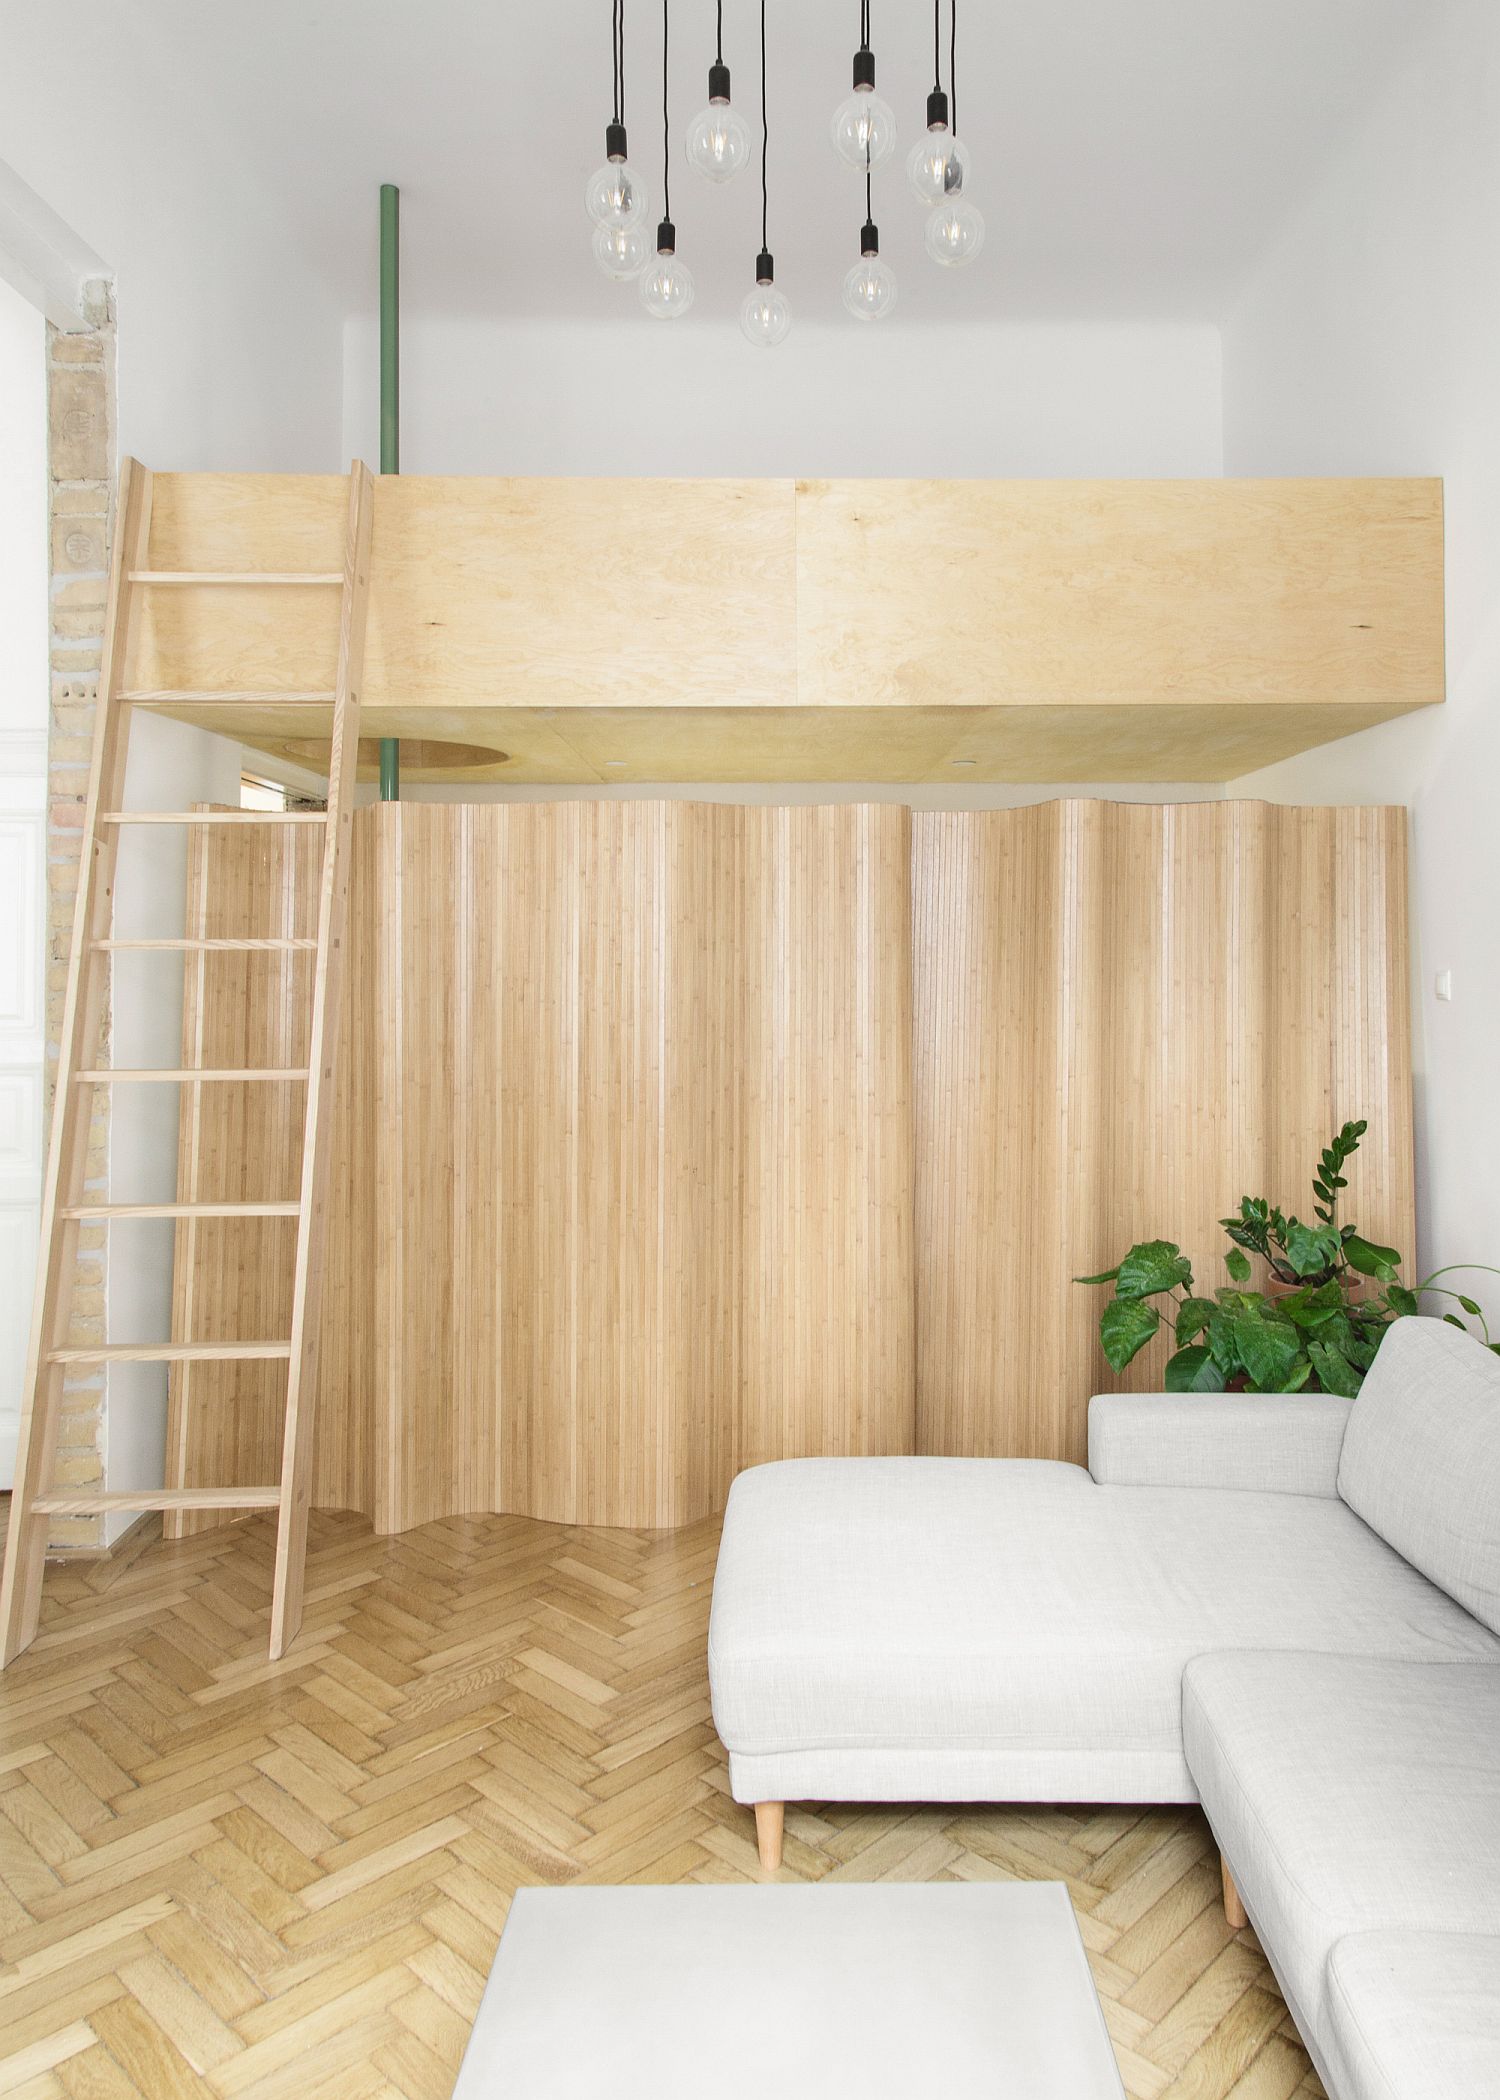 Ladders-and-wooden-finishes-give-the-apartment-a-spacious-and-stylish-look